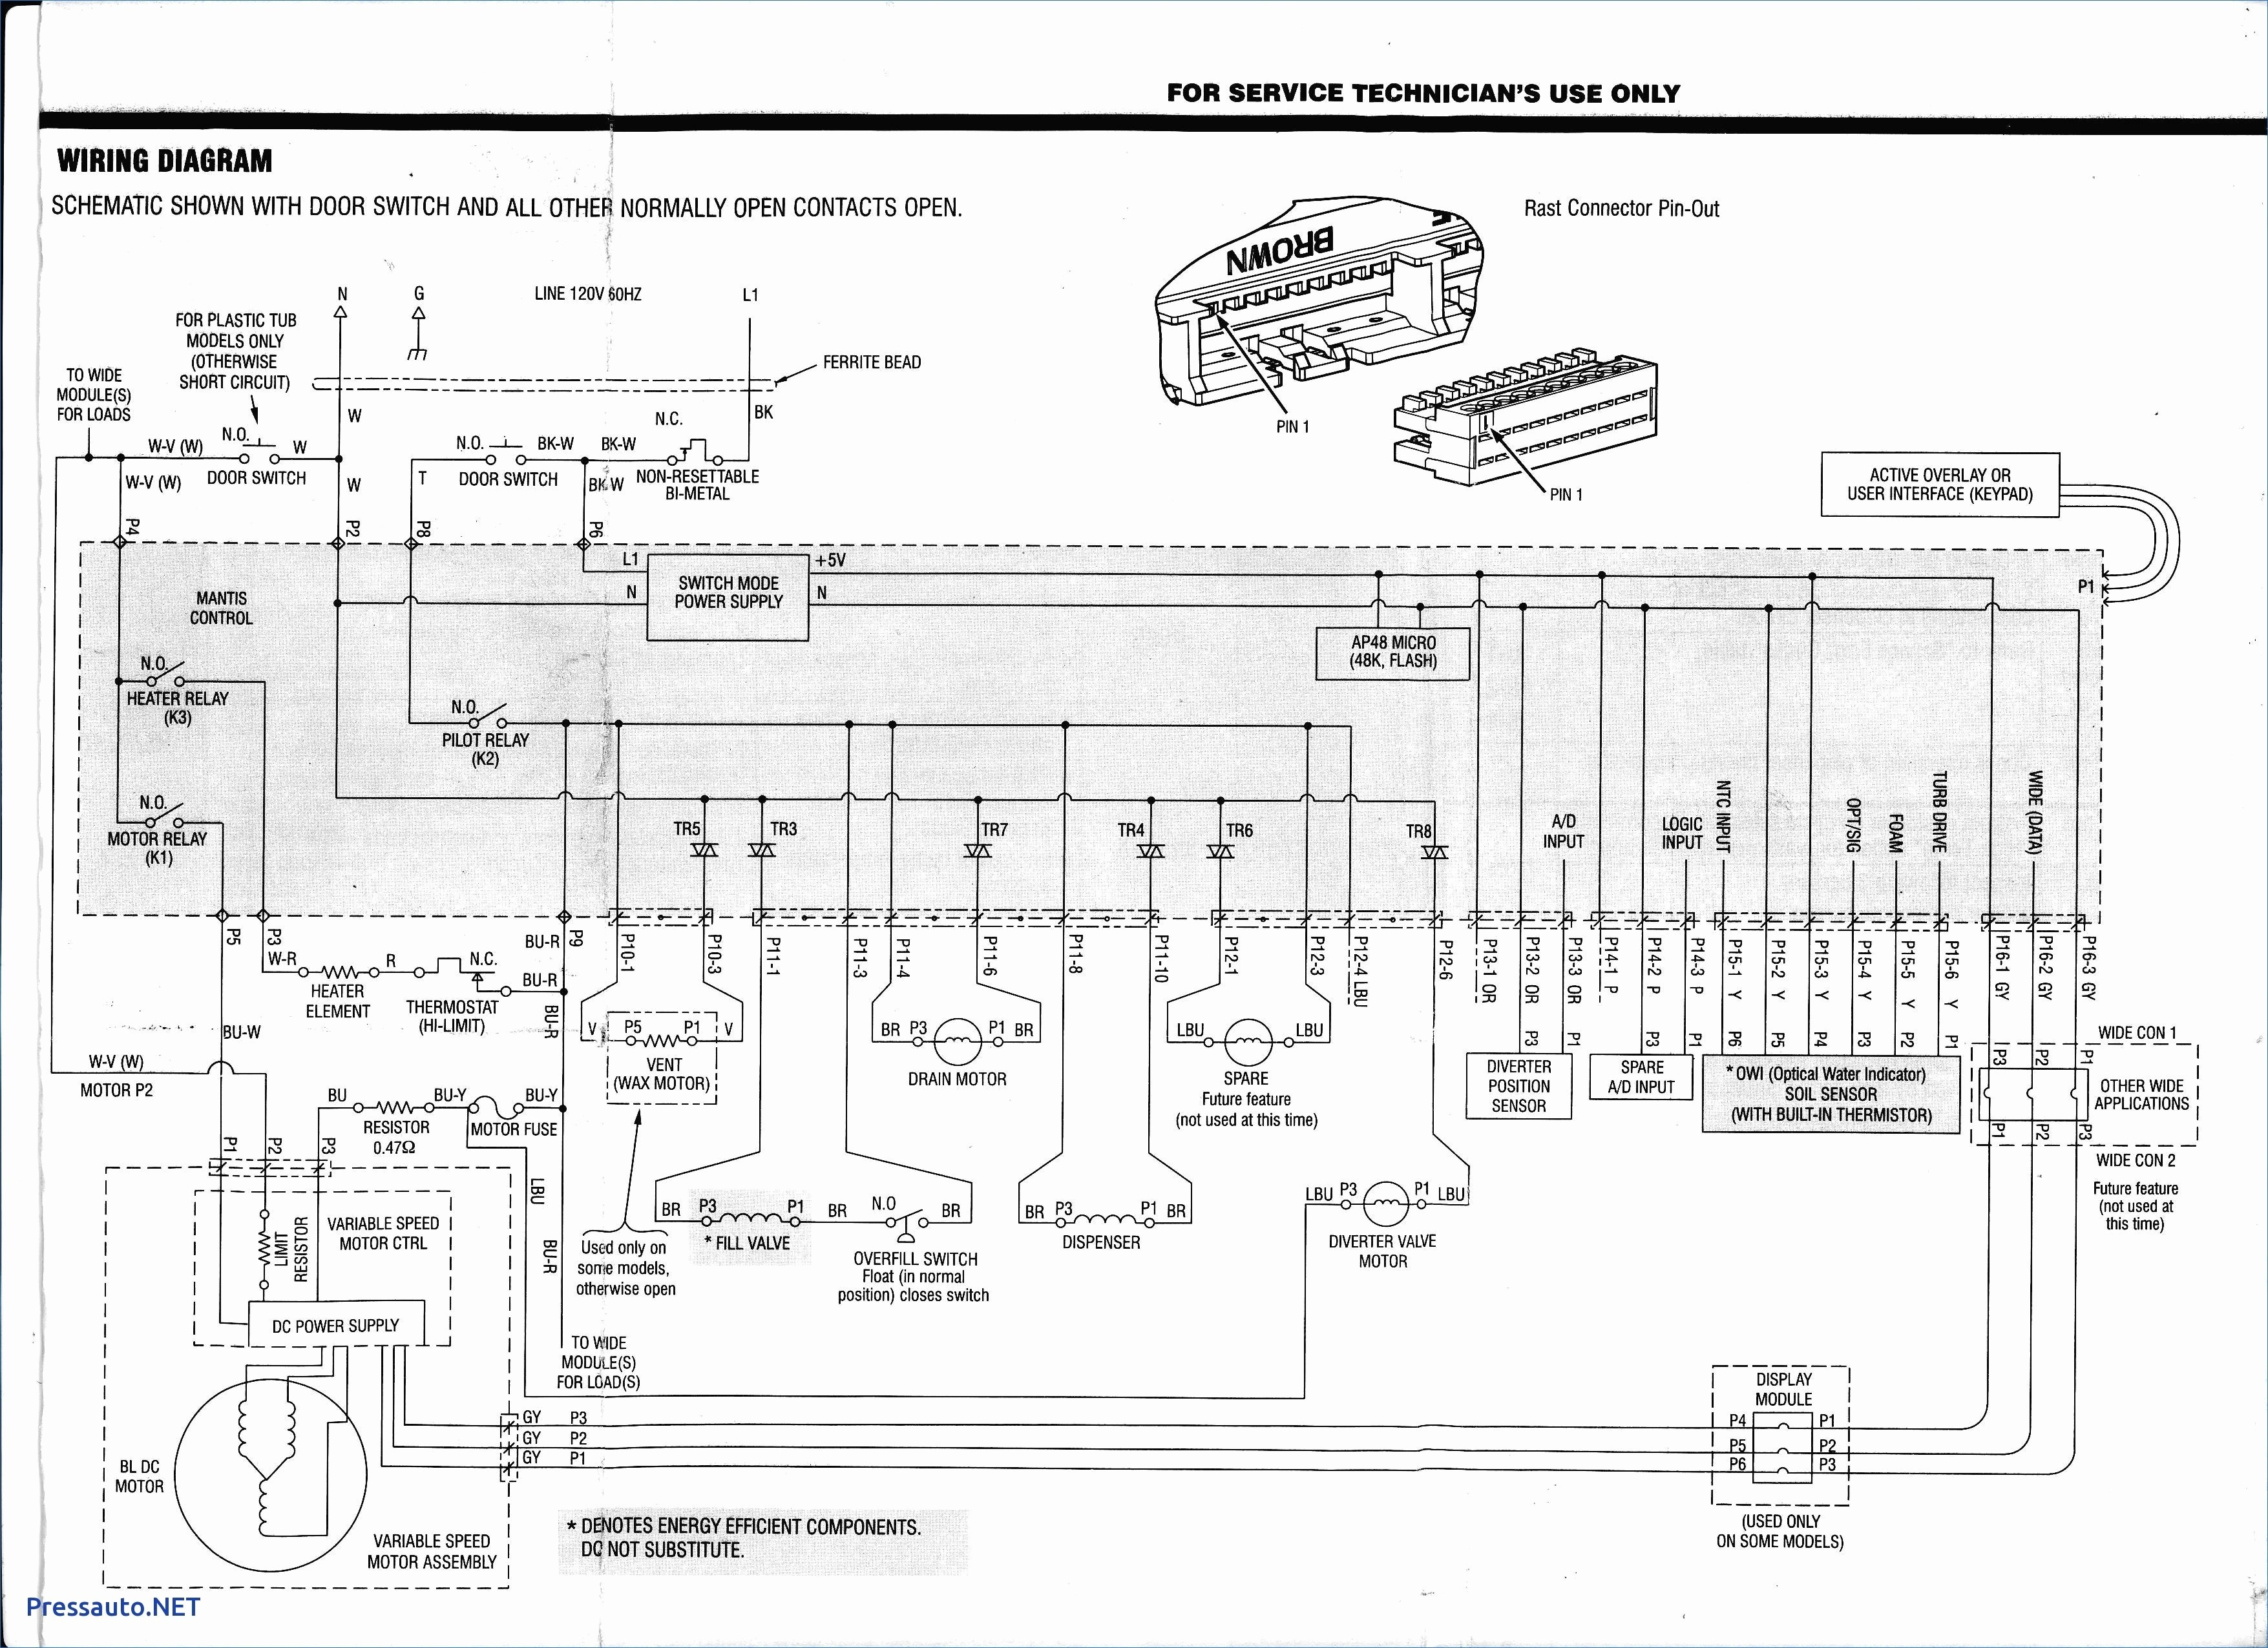 Whirlpool Dryer Wed5100Vq1 Wiring Diagram | Manual E-Books - Whirlpool Dryer Wiring Diagram